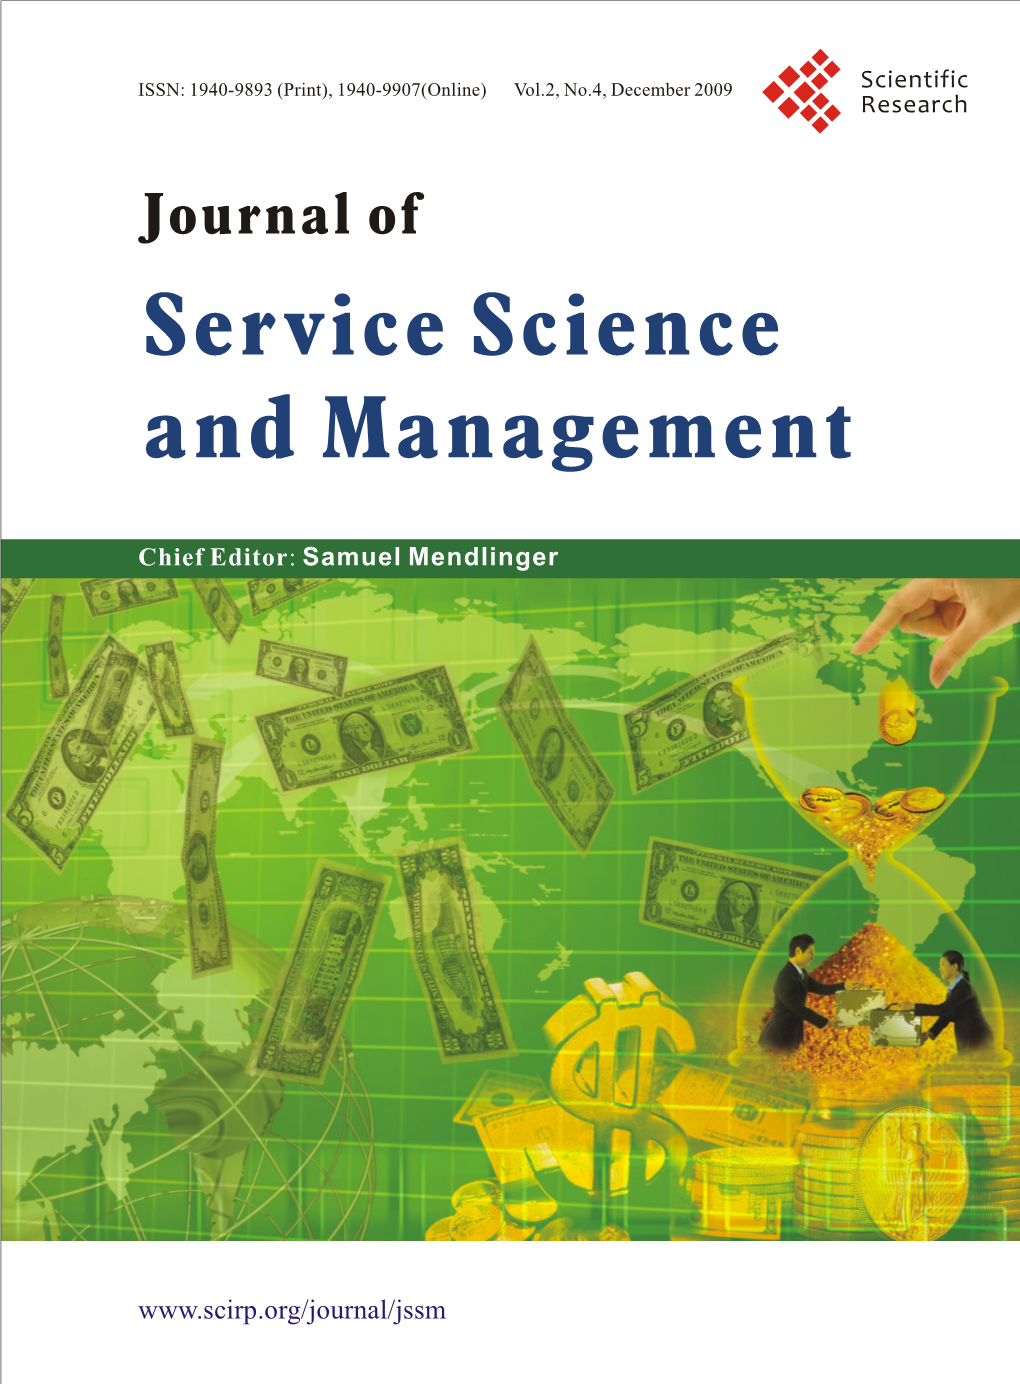 Journal of Service Science and Management